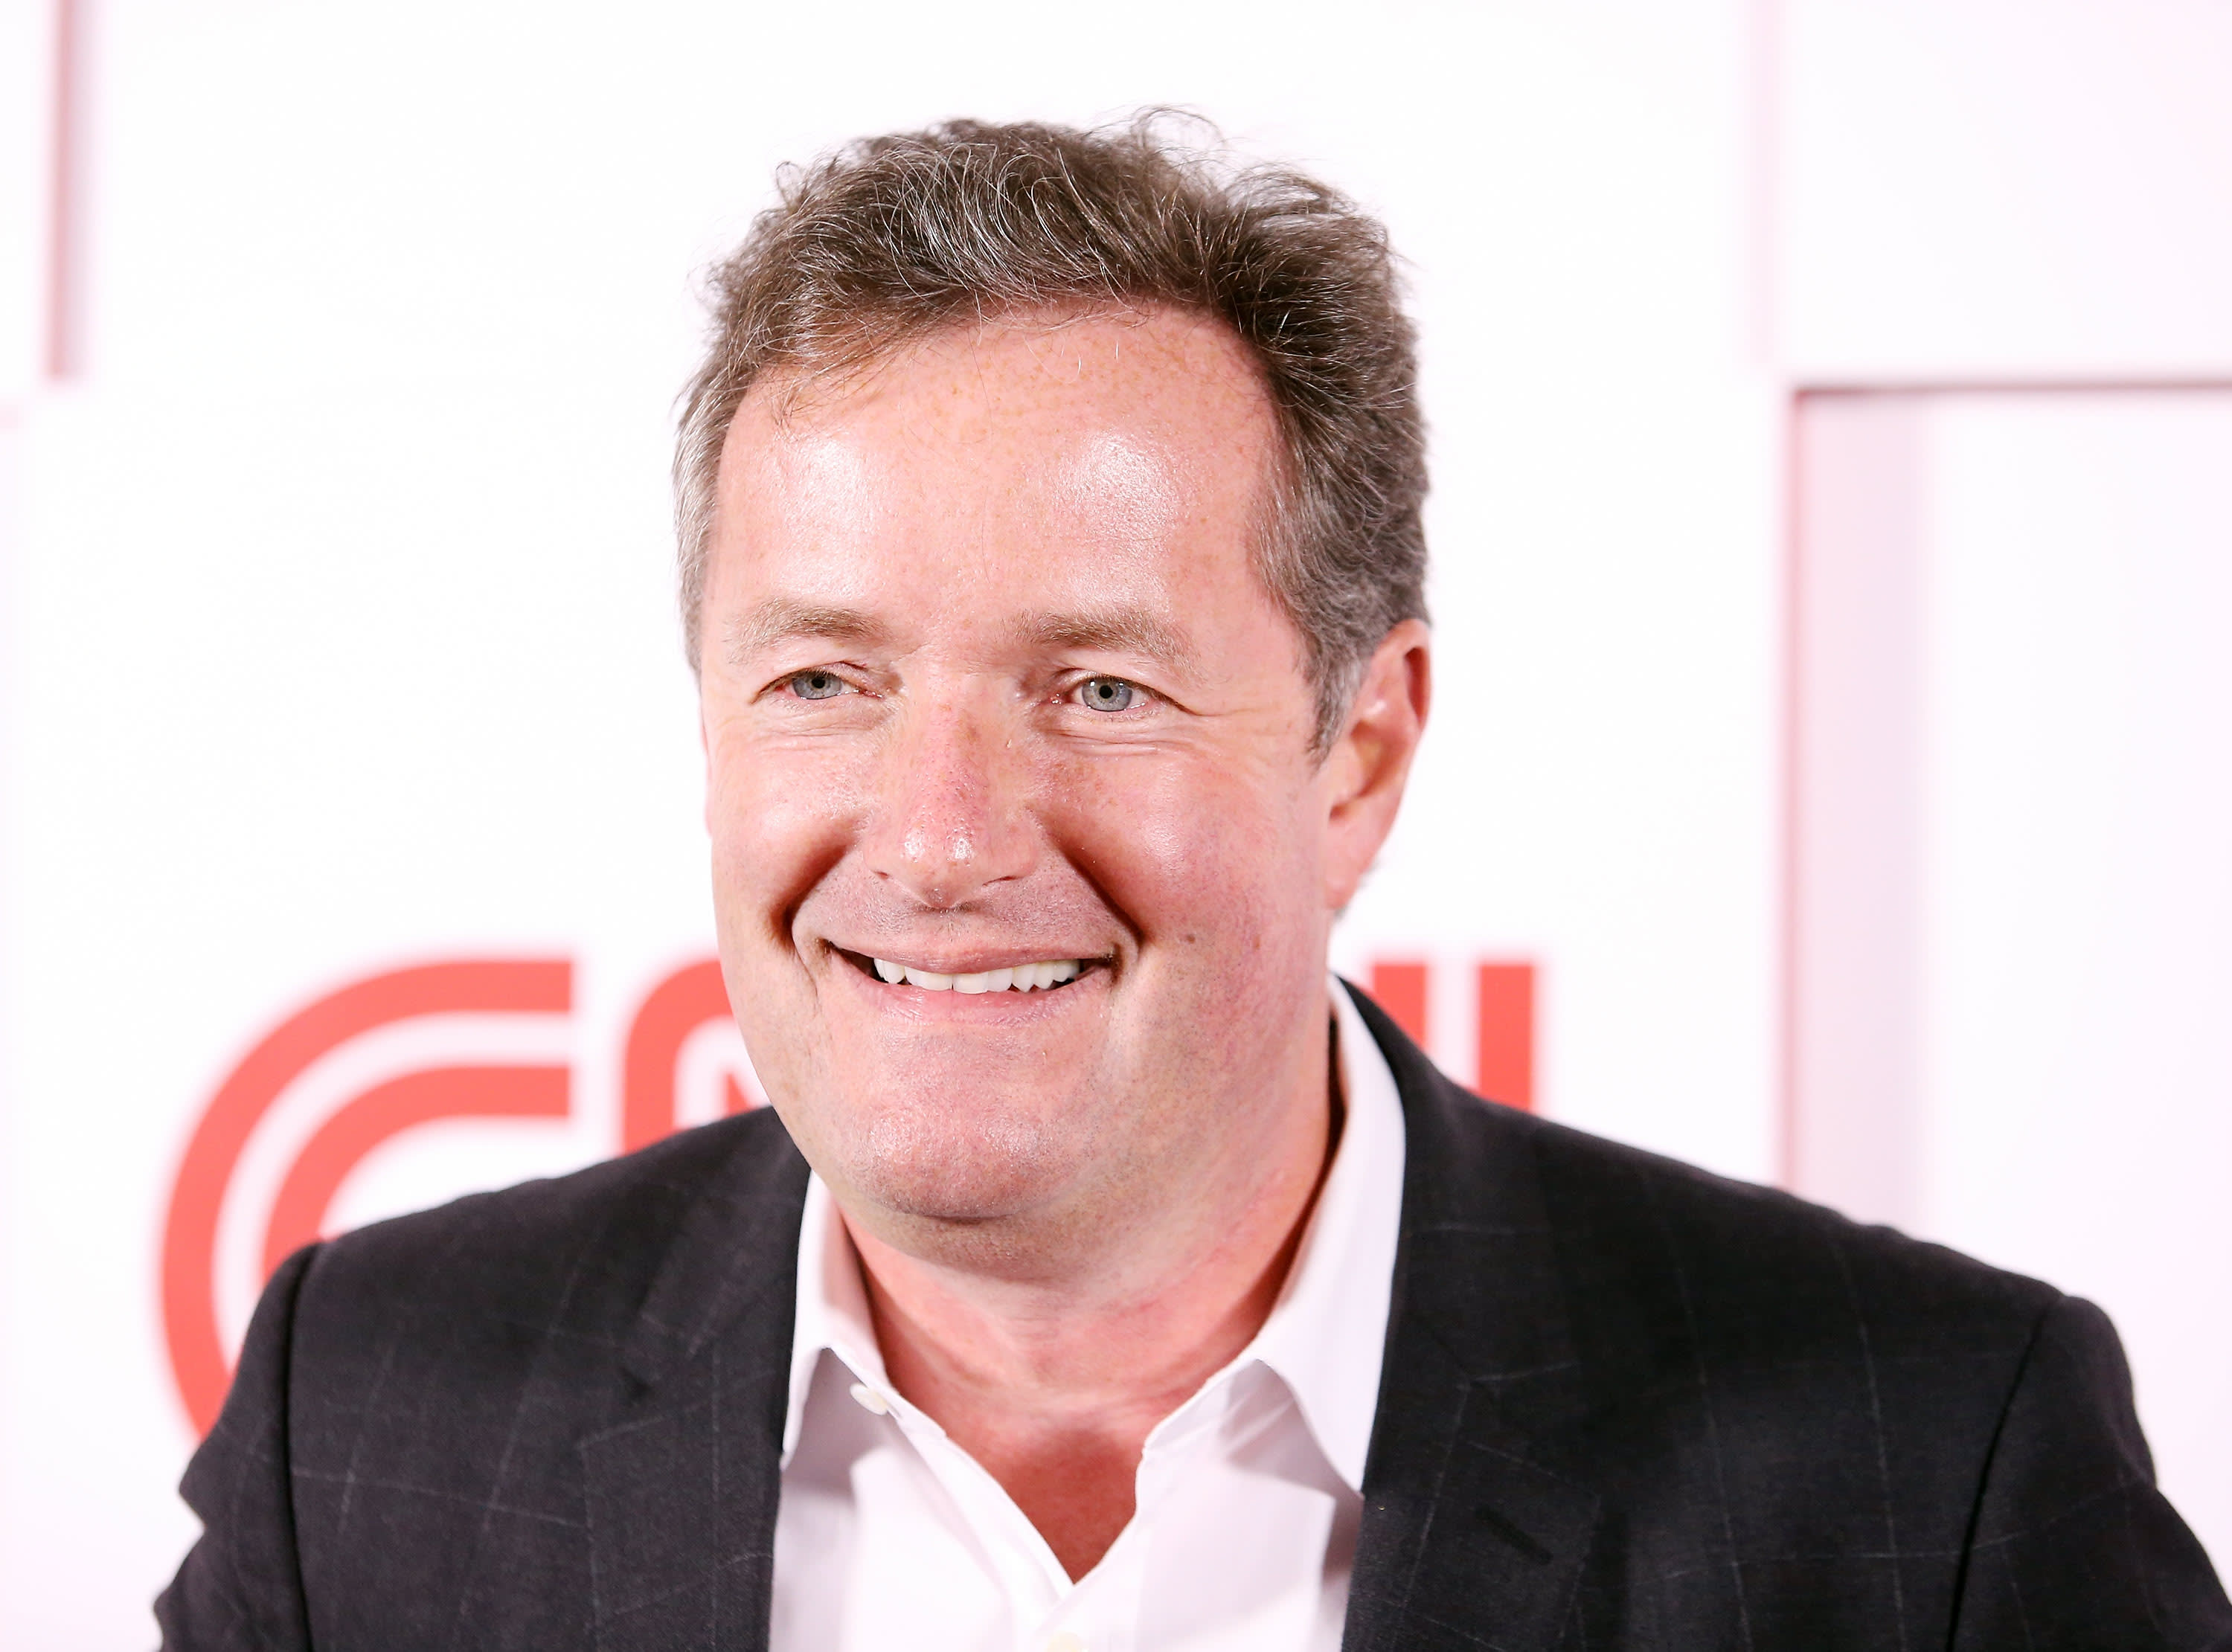 Piers Morgan quits 'Good Morning Britain' after backlash over his Meghan Markle comments